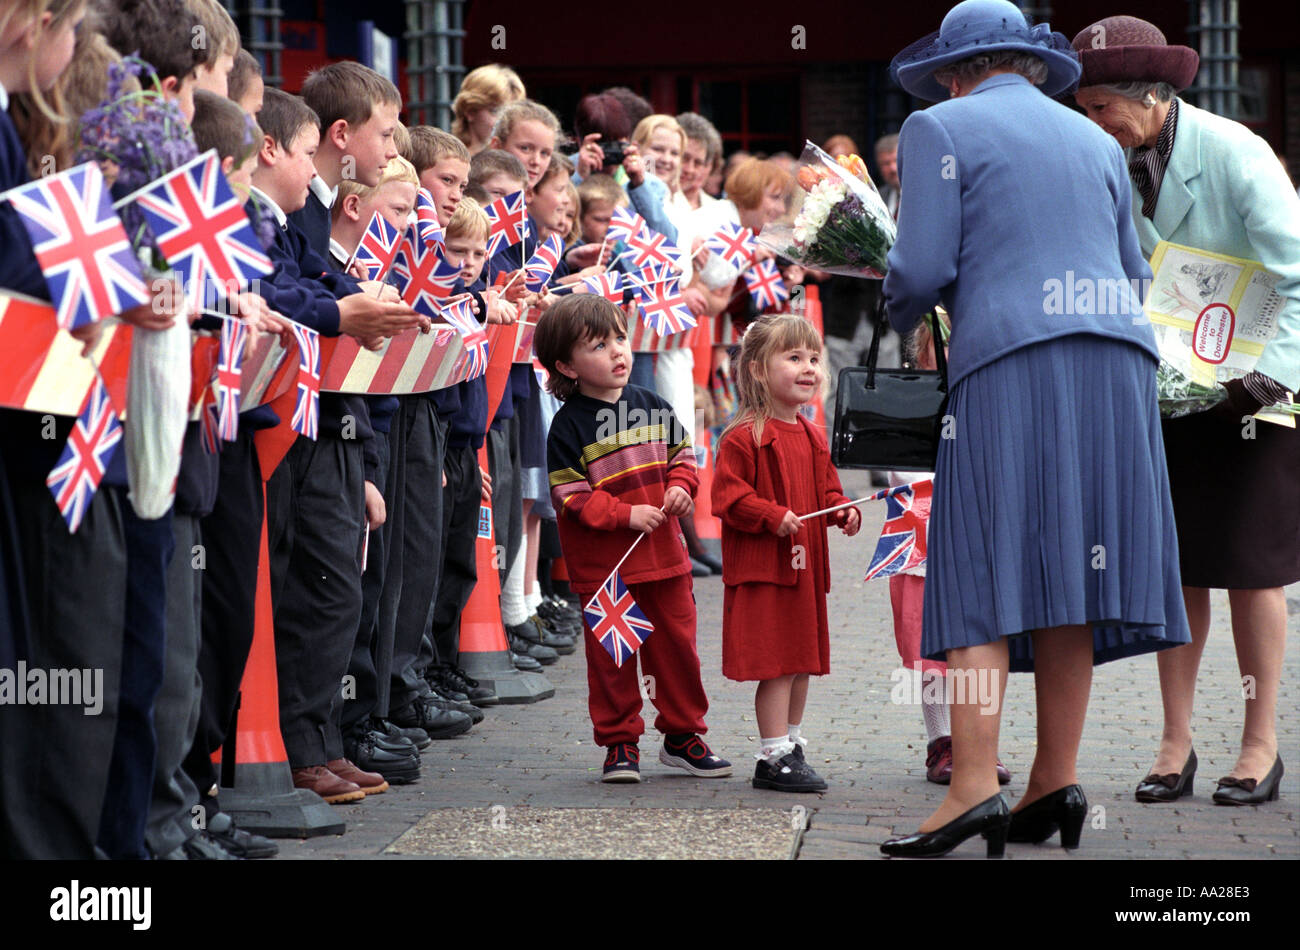 Children look on in amazement at Queen Elizabeth II during a visit to her son s Poundbury Village project Stock Photo